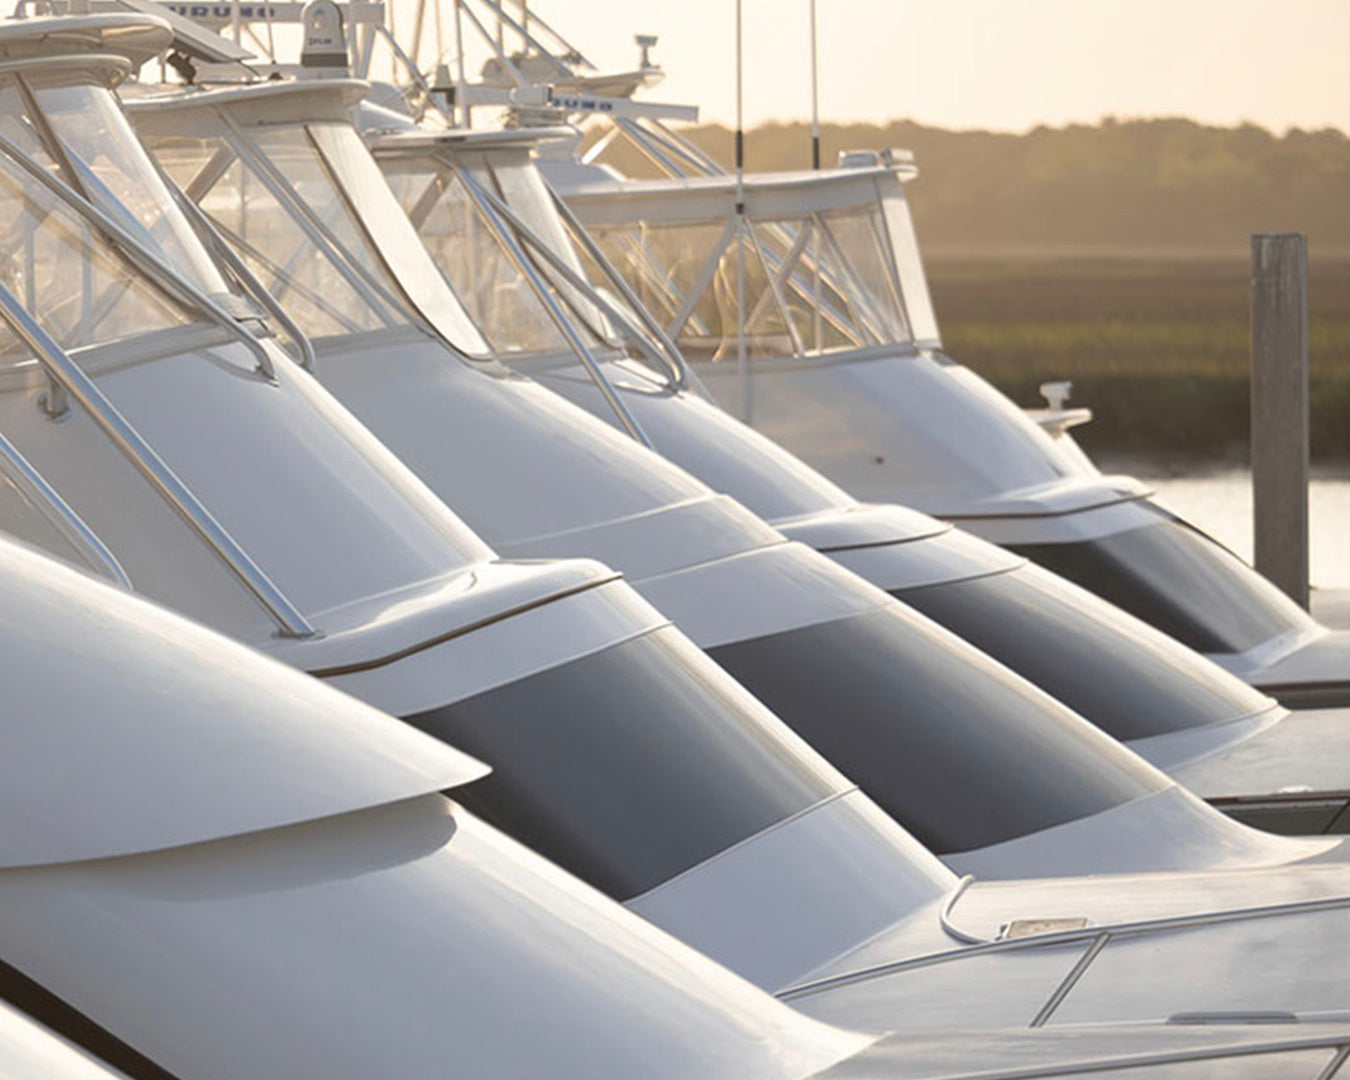 Sportfish Aesthetics - Do you see the difference?